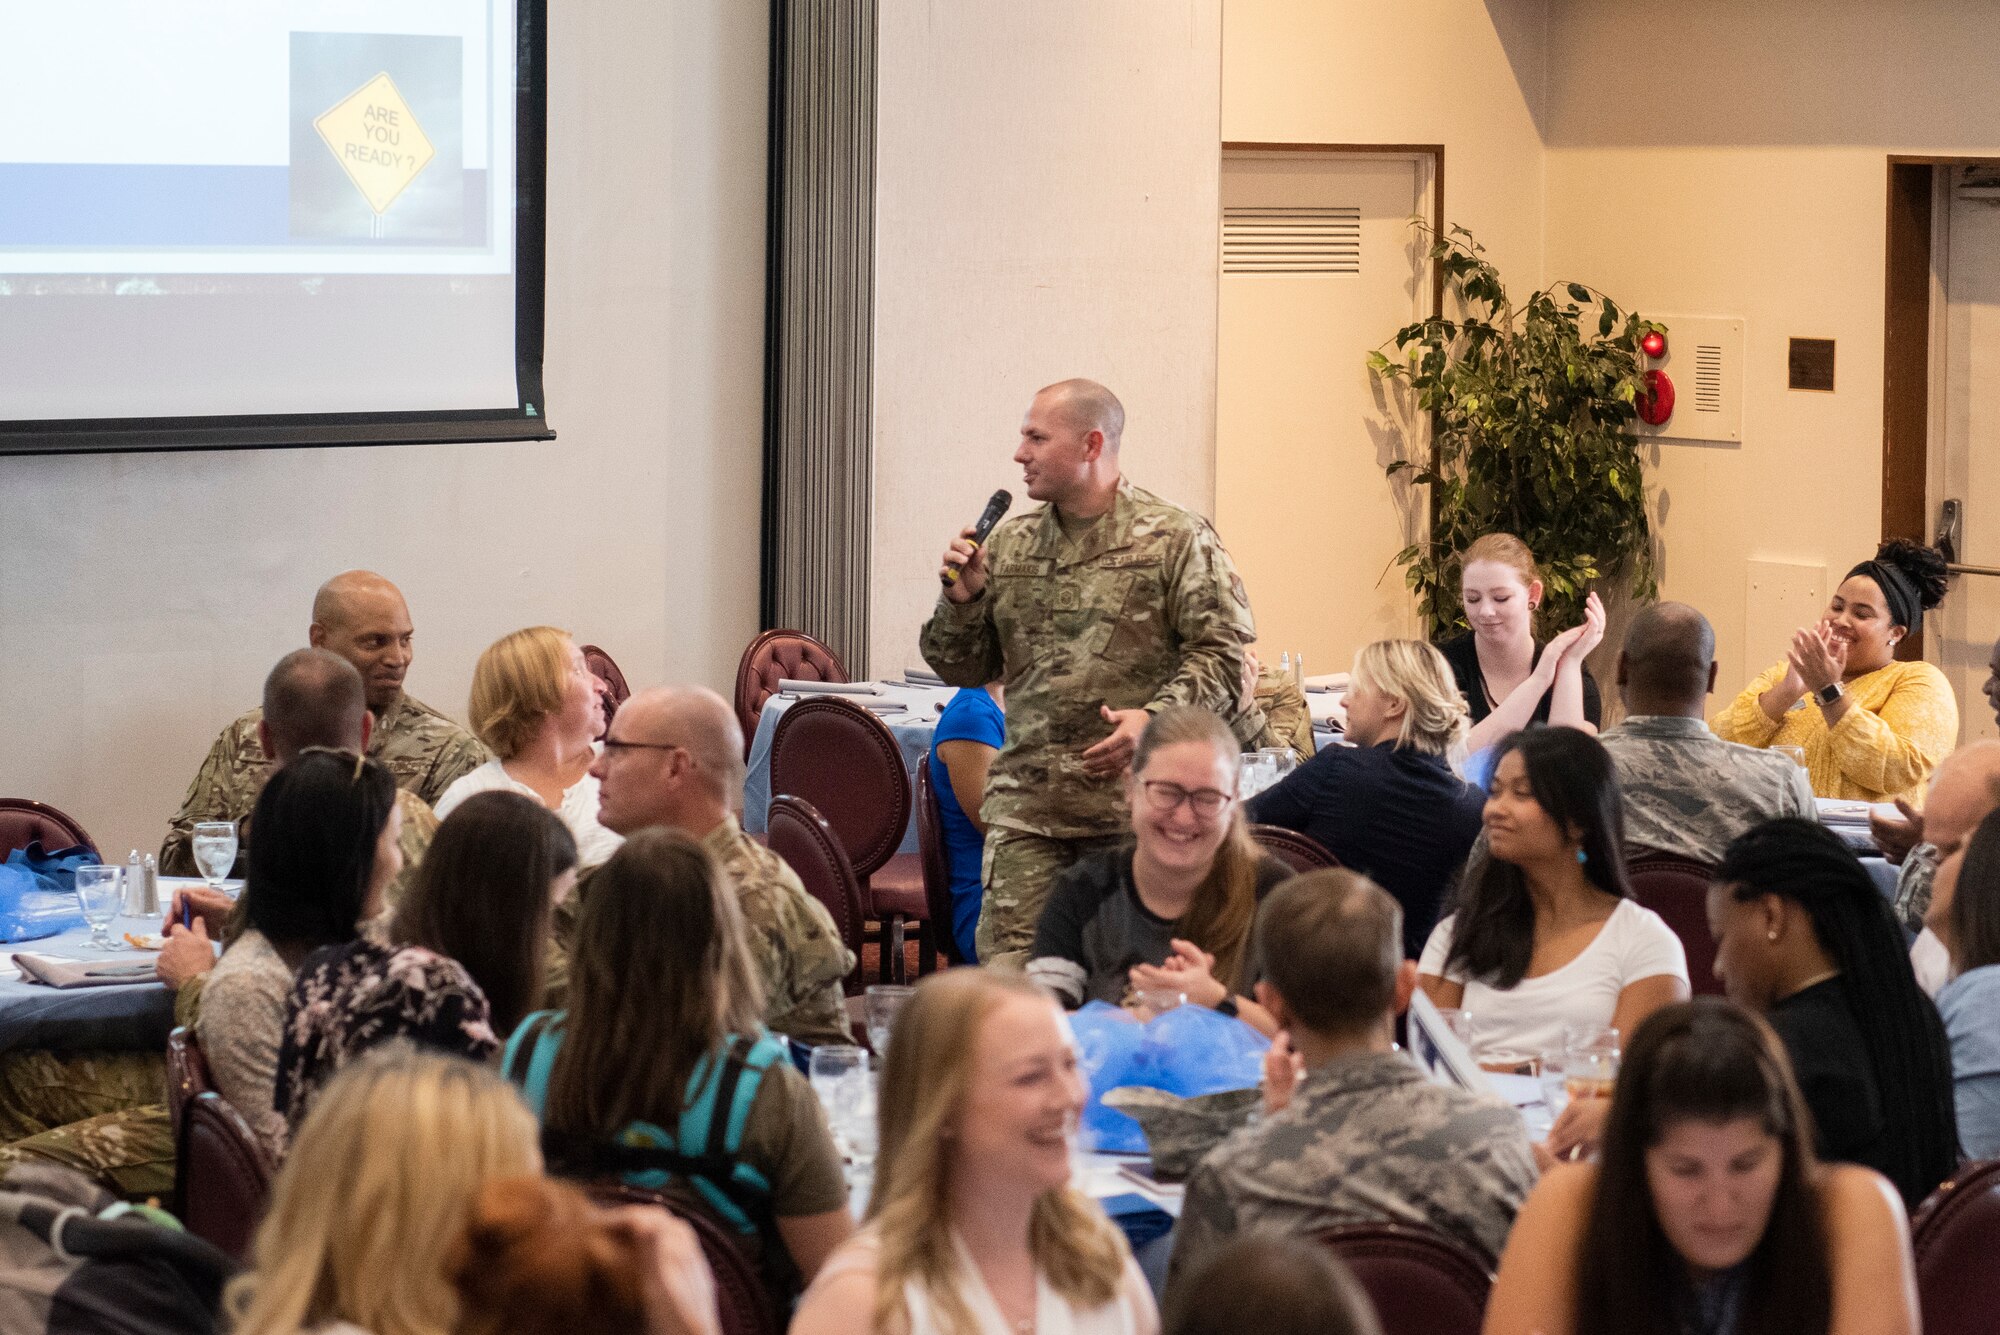 Participants in Key Spouse Kick-Off lunch and learn discuss various scenarios in groups on Oct. 2, 2019, at Yokota Air Base, Japan.